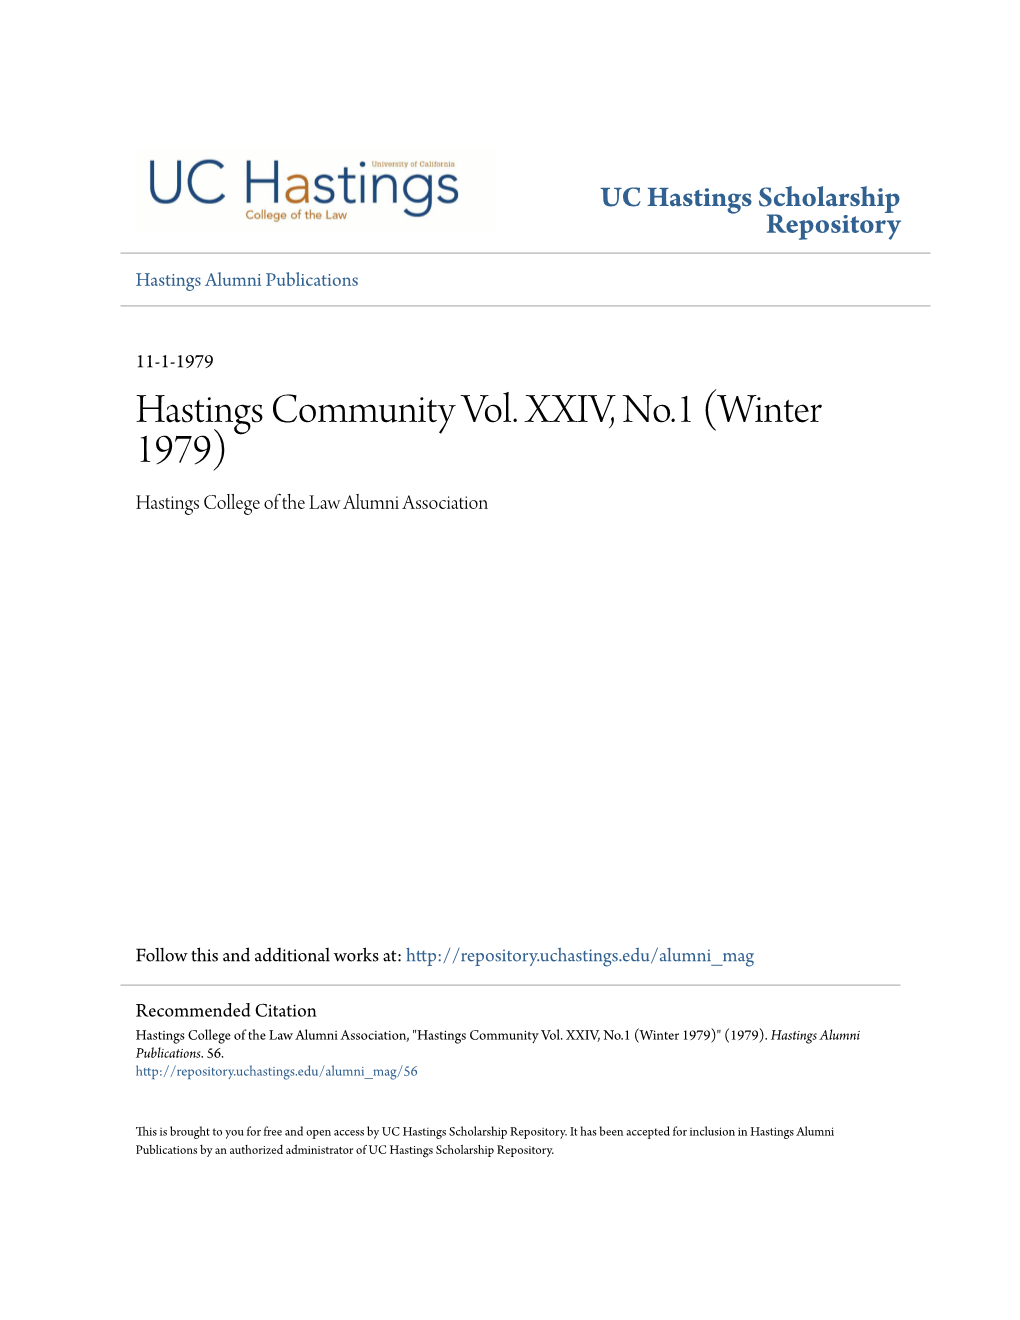 Hastings Community Vol. XXIV, No.1 (Winter 1979) Hastings College of the Law Alumni Association